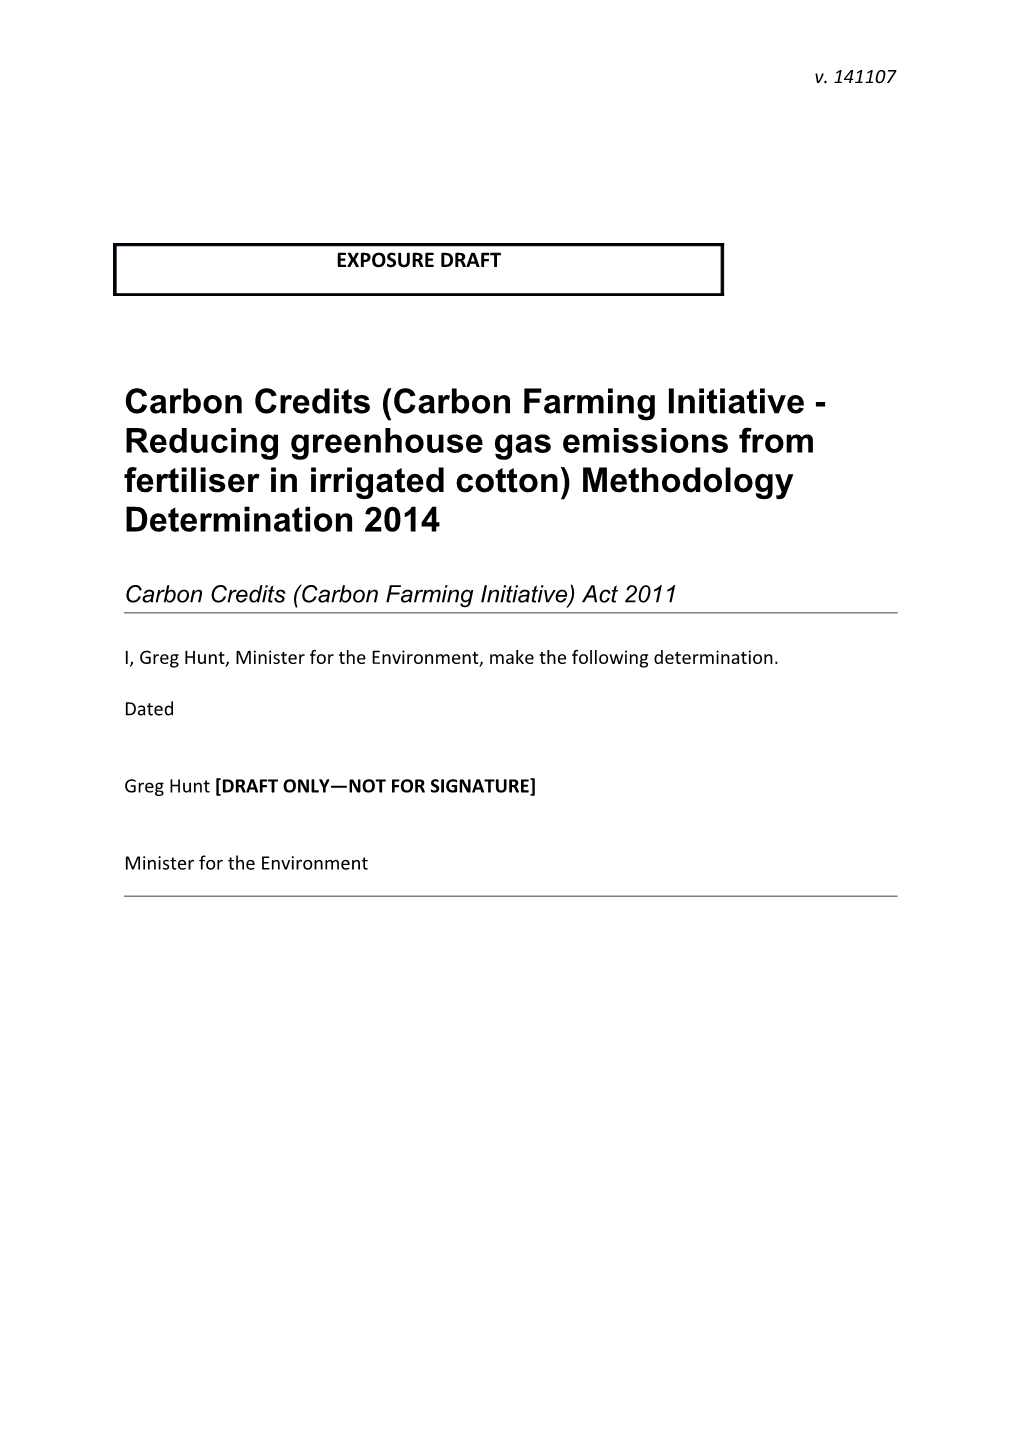 Carbon Credits (Carbon Farming Initiative - Reducing Greenhouse Gas Emissions from Fertiliser